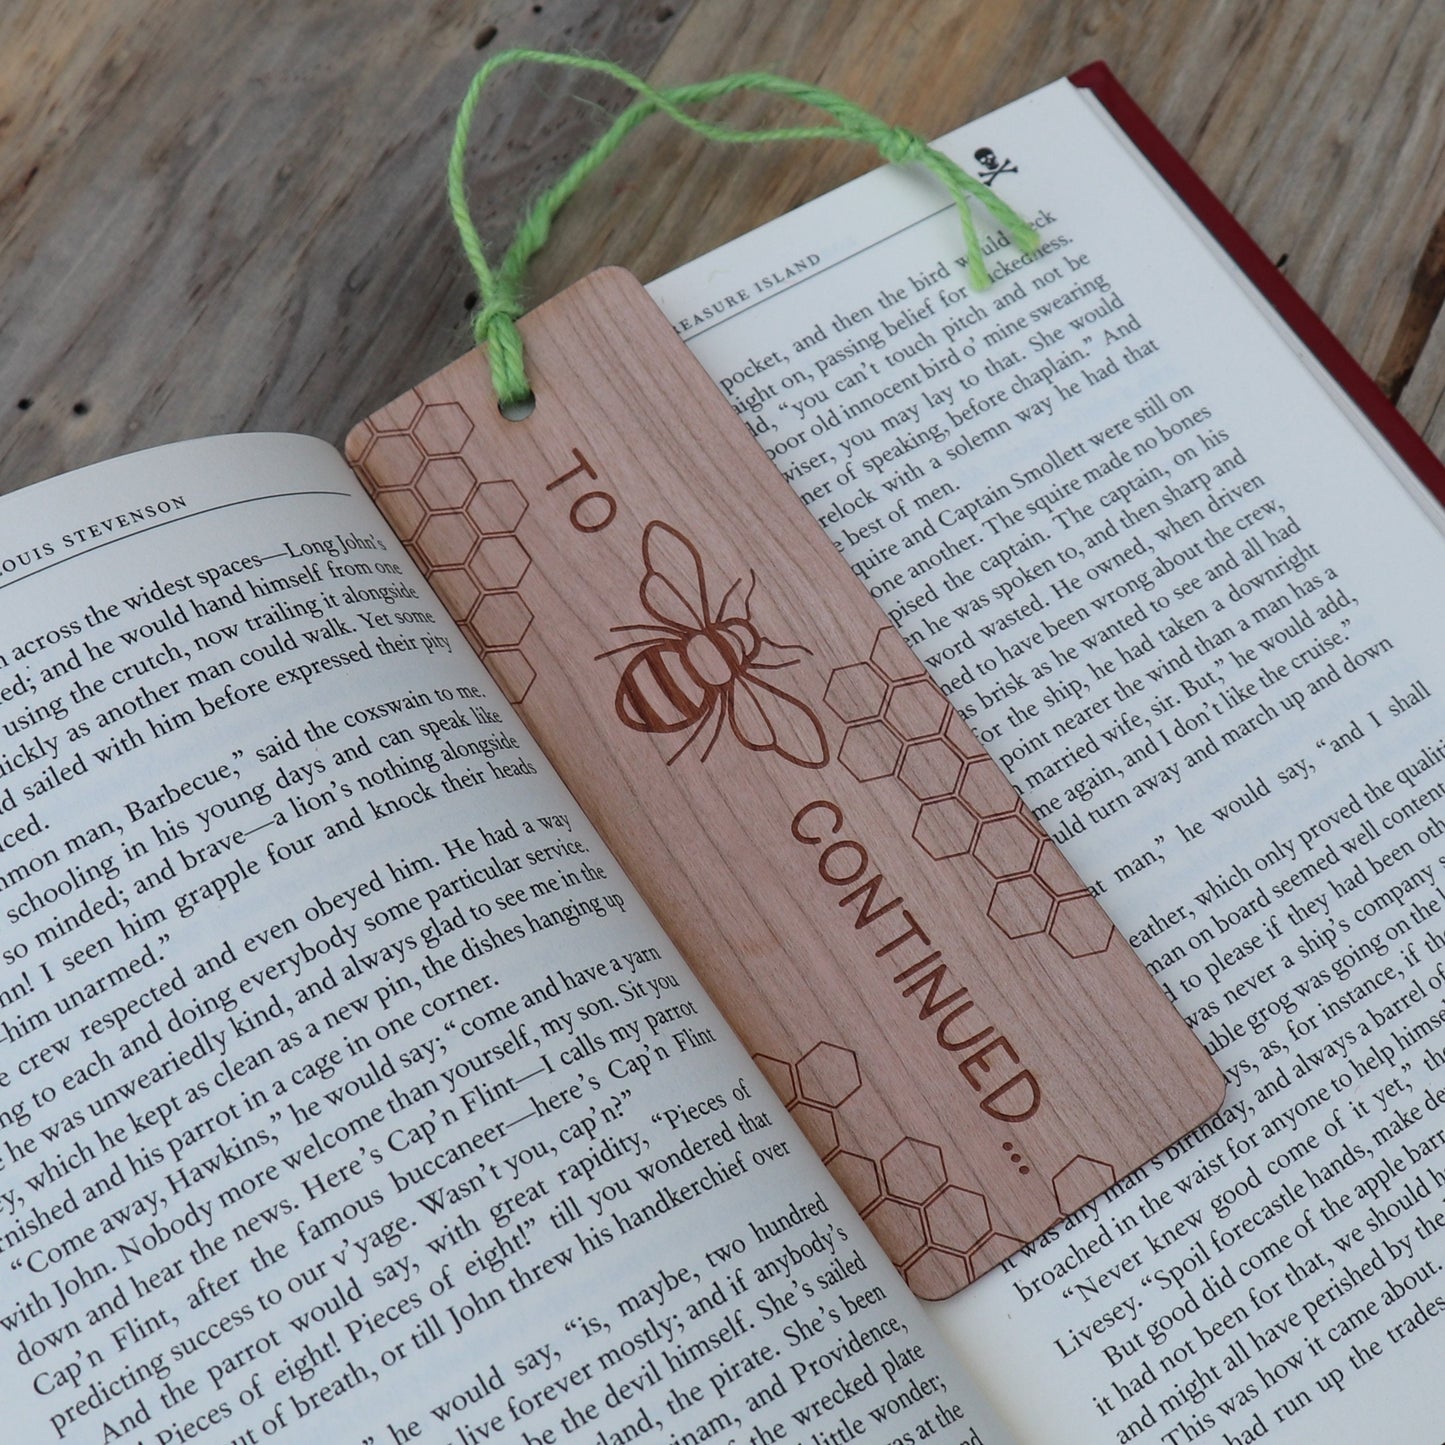 To Be(e) Continued... - Wood Bookmark